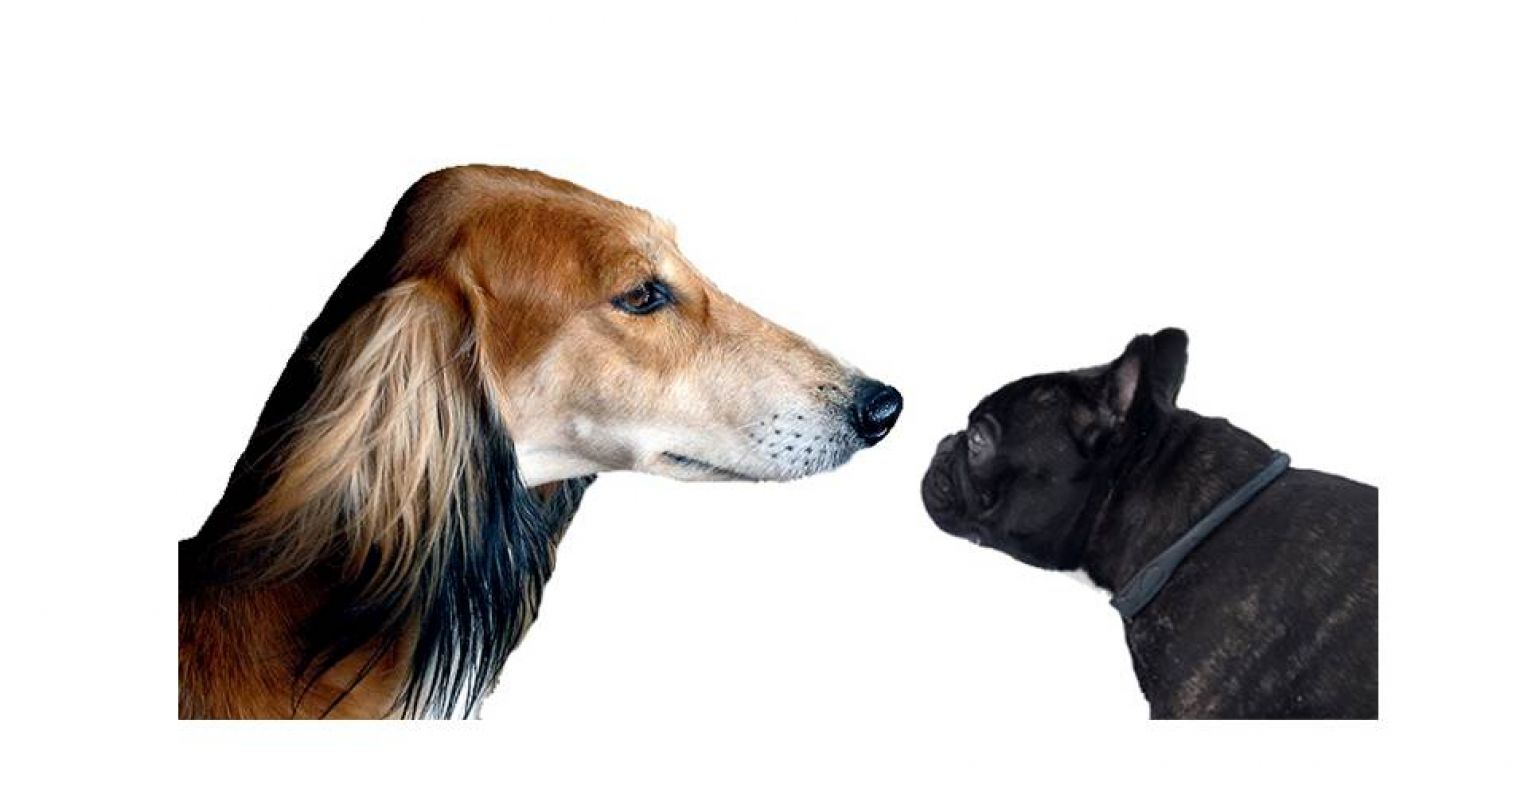 A Dog's Size and Head Shape Predicts Its Behavior